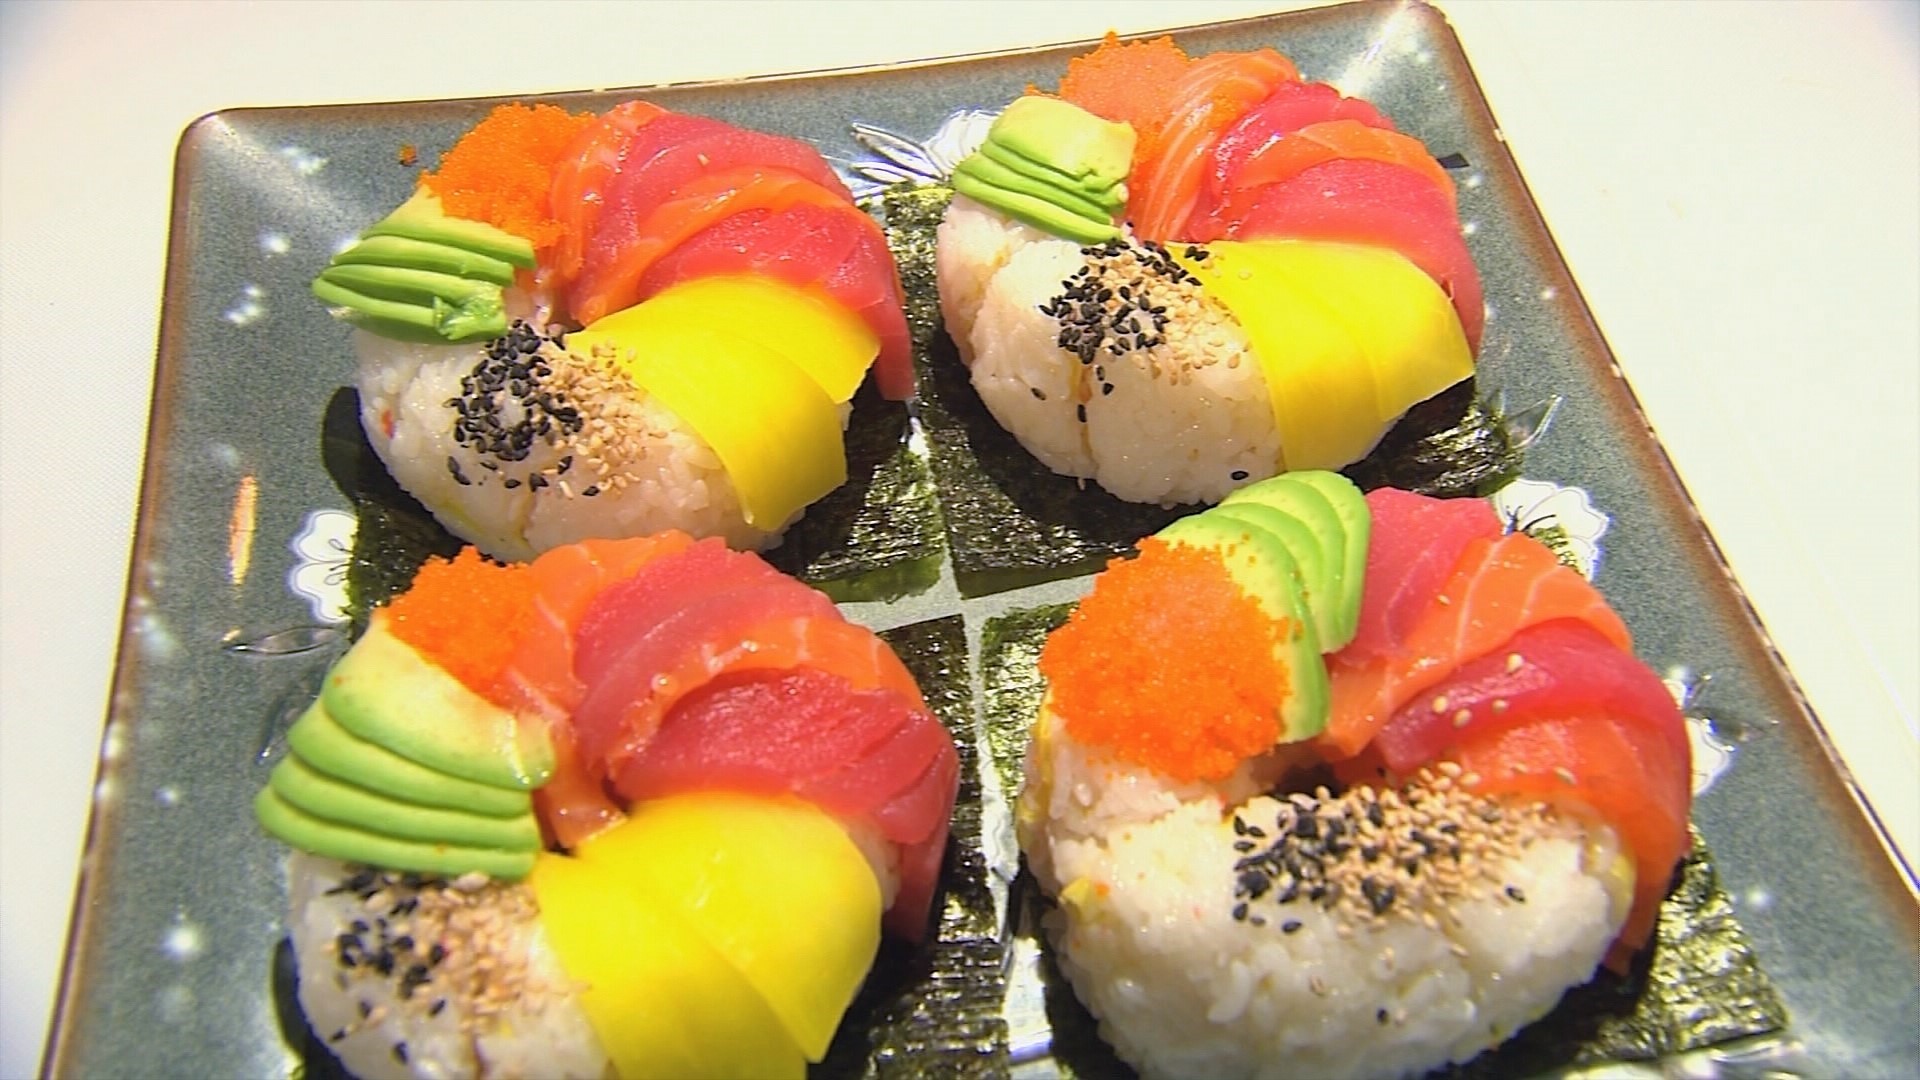 Chef and owner Kazu Kamada uses his imagination to blend flavors and colors into edible art.